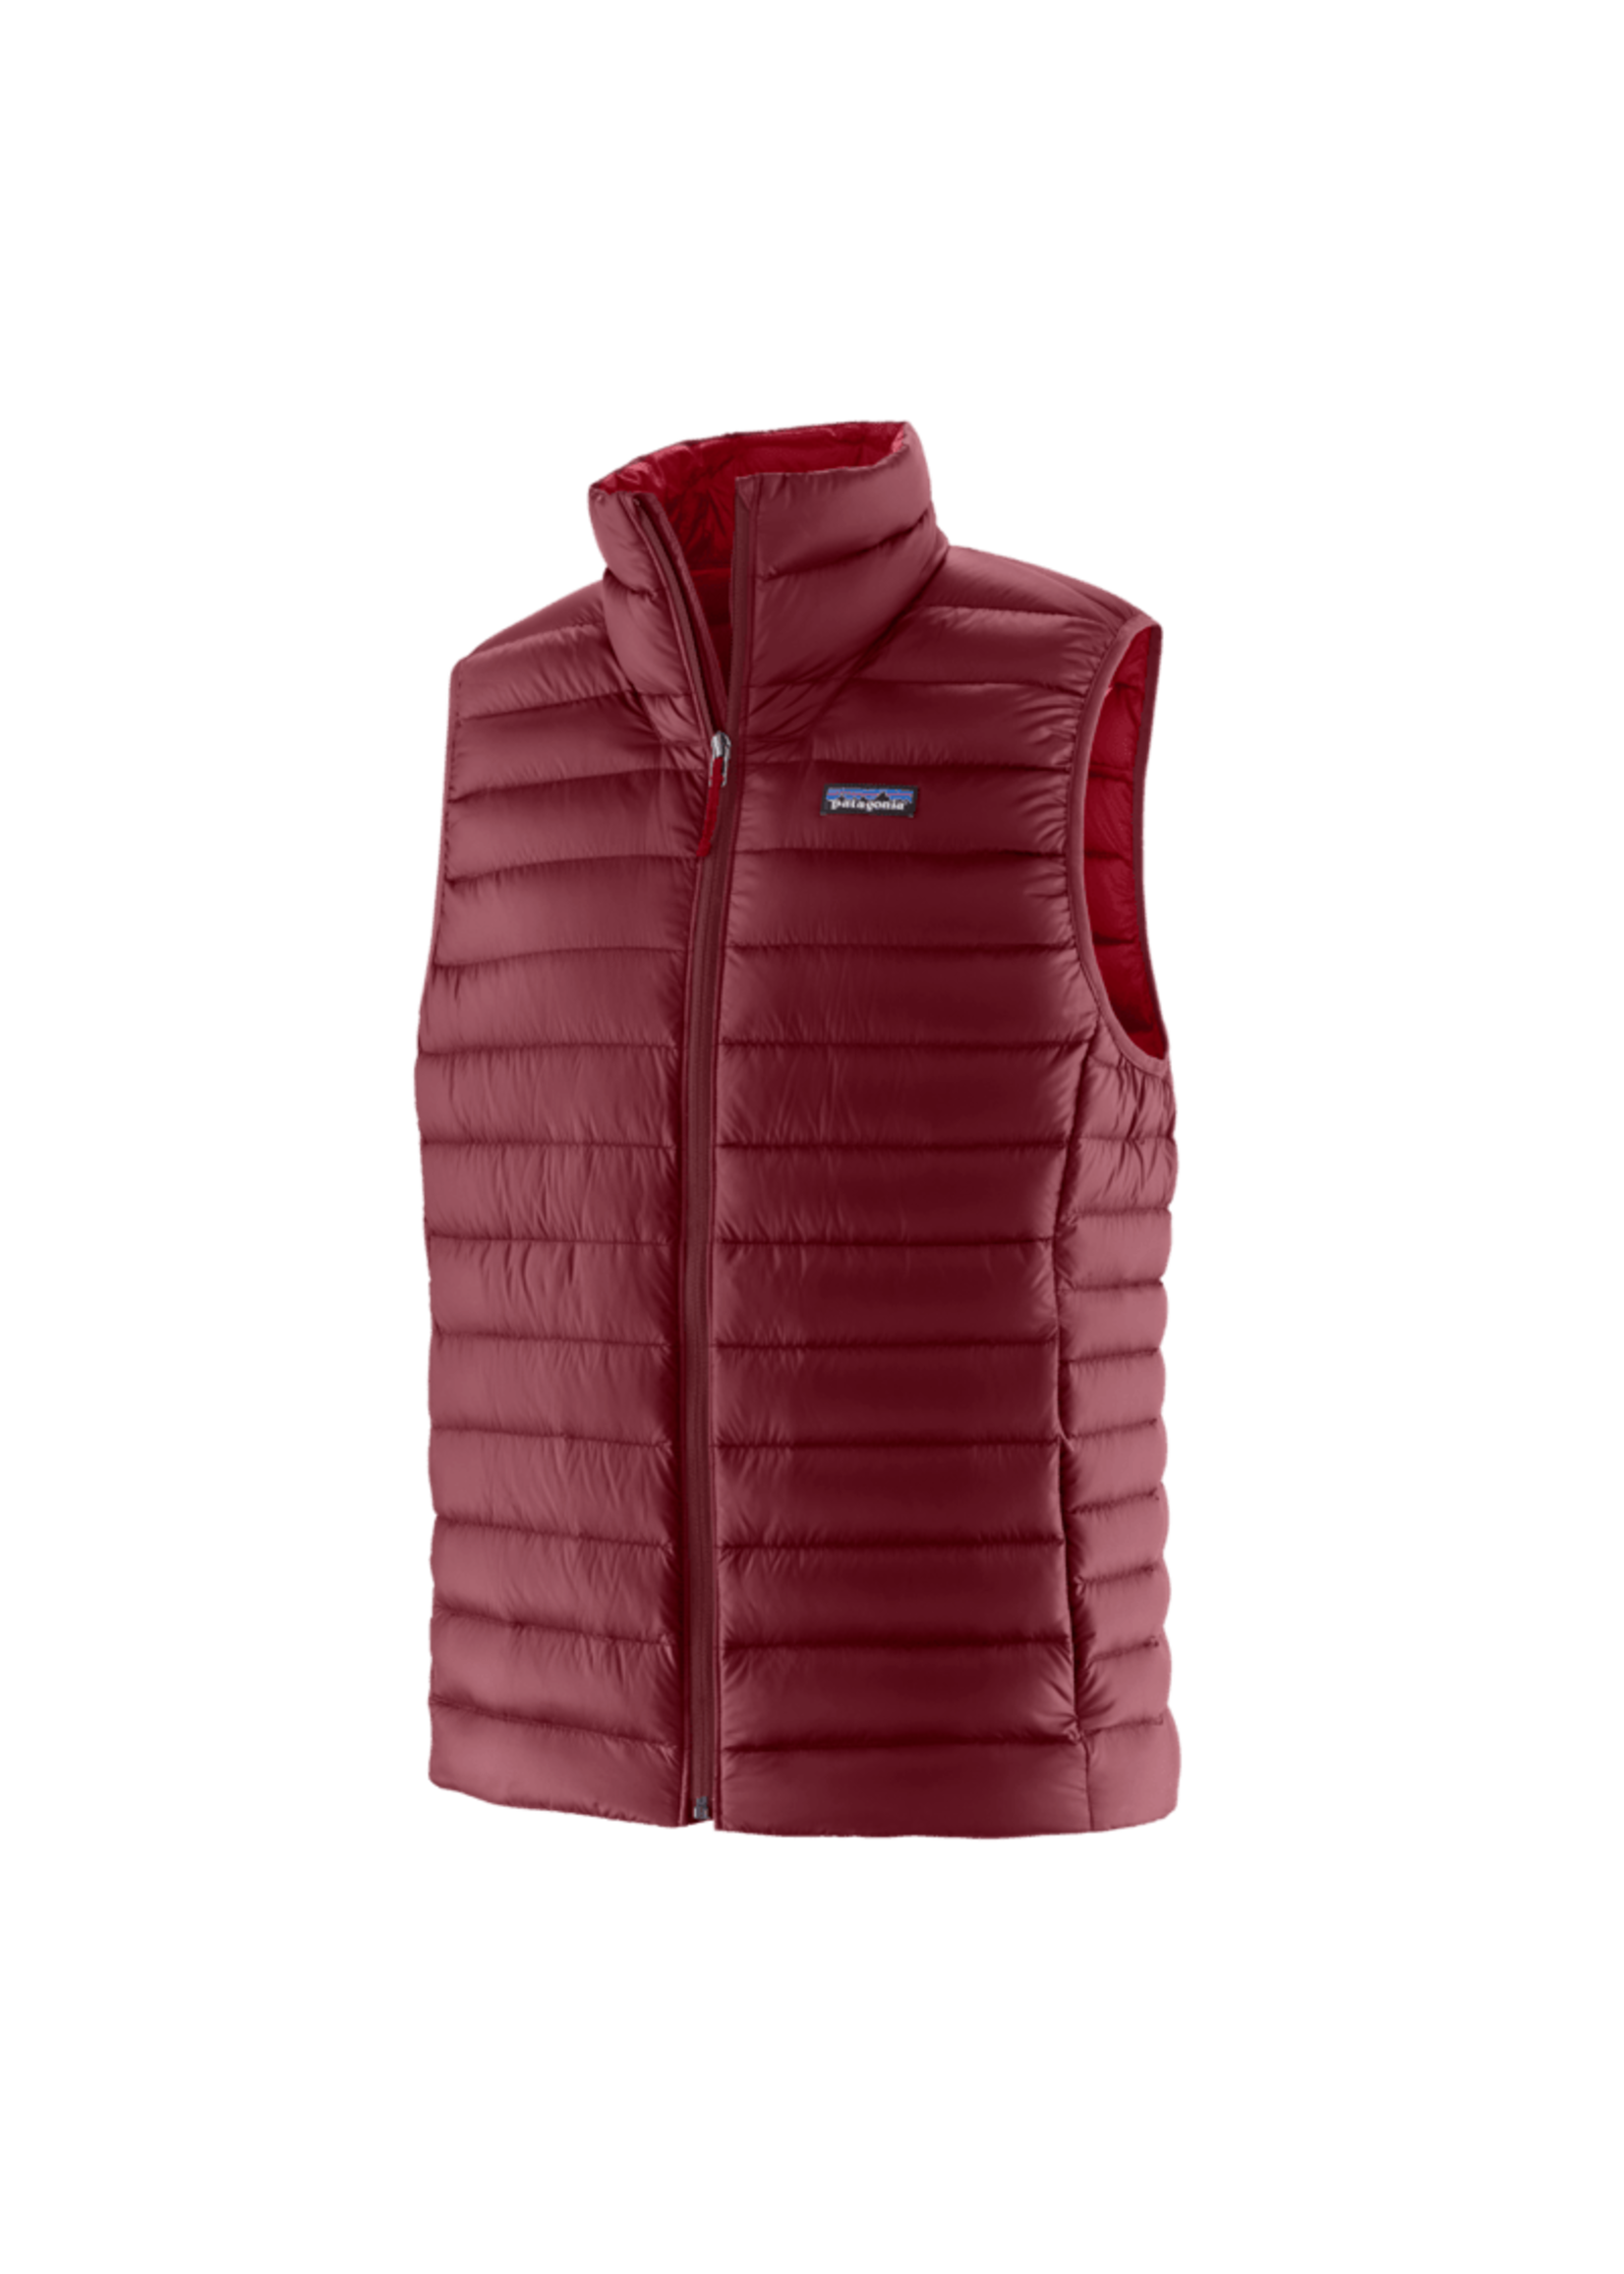 Patagonia Men's Down Sweater Vest - Carmine Red